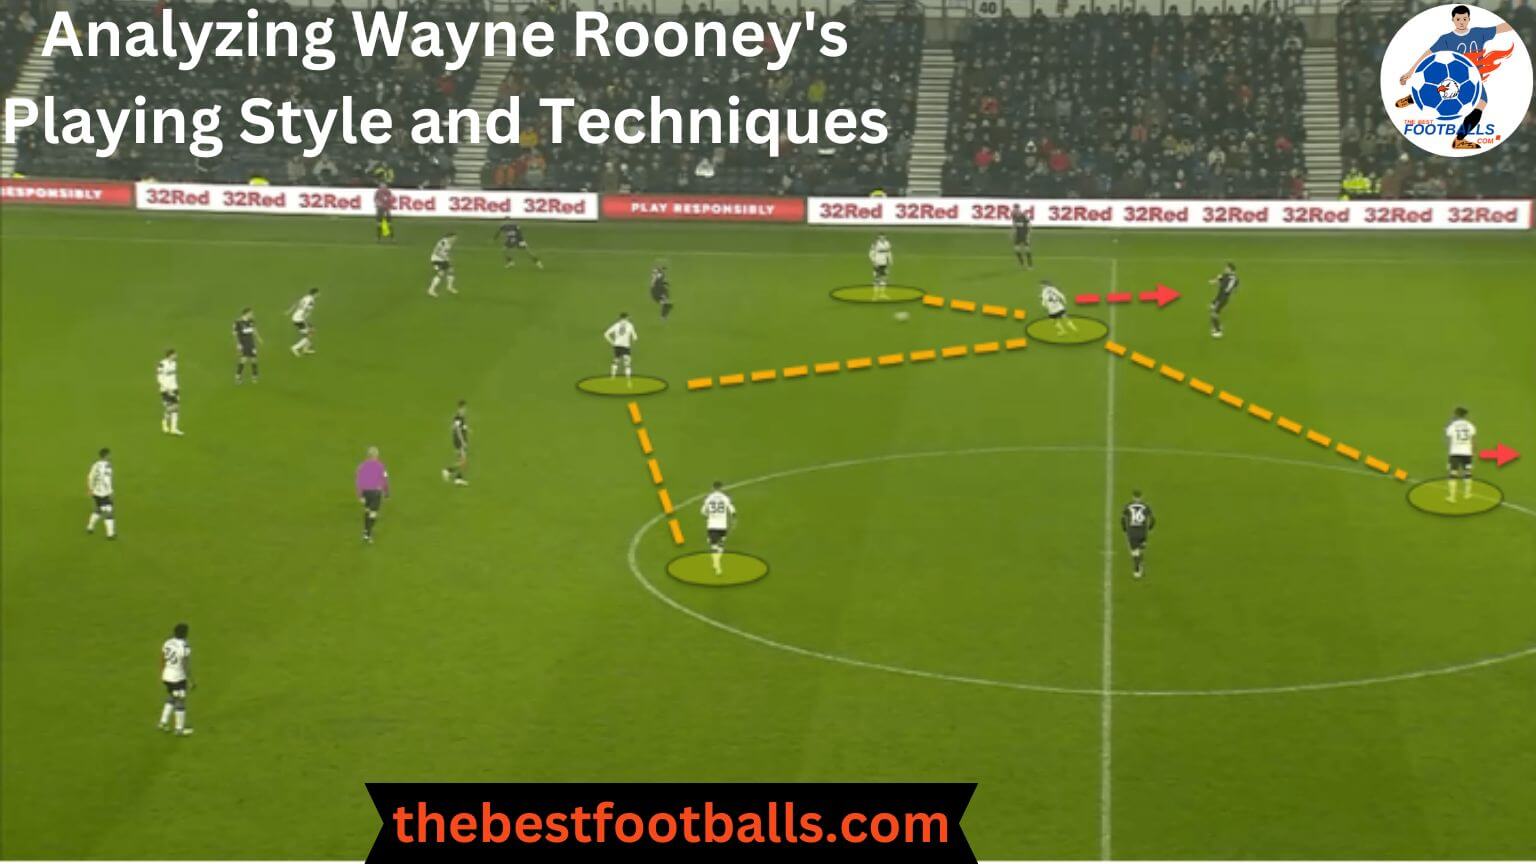 Analyzing Wayne Rooney’s Playing Style and Techniques